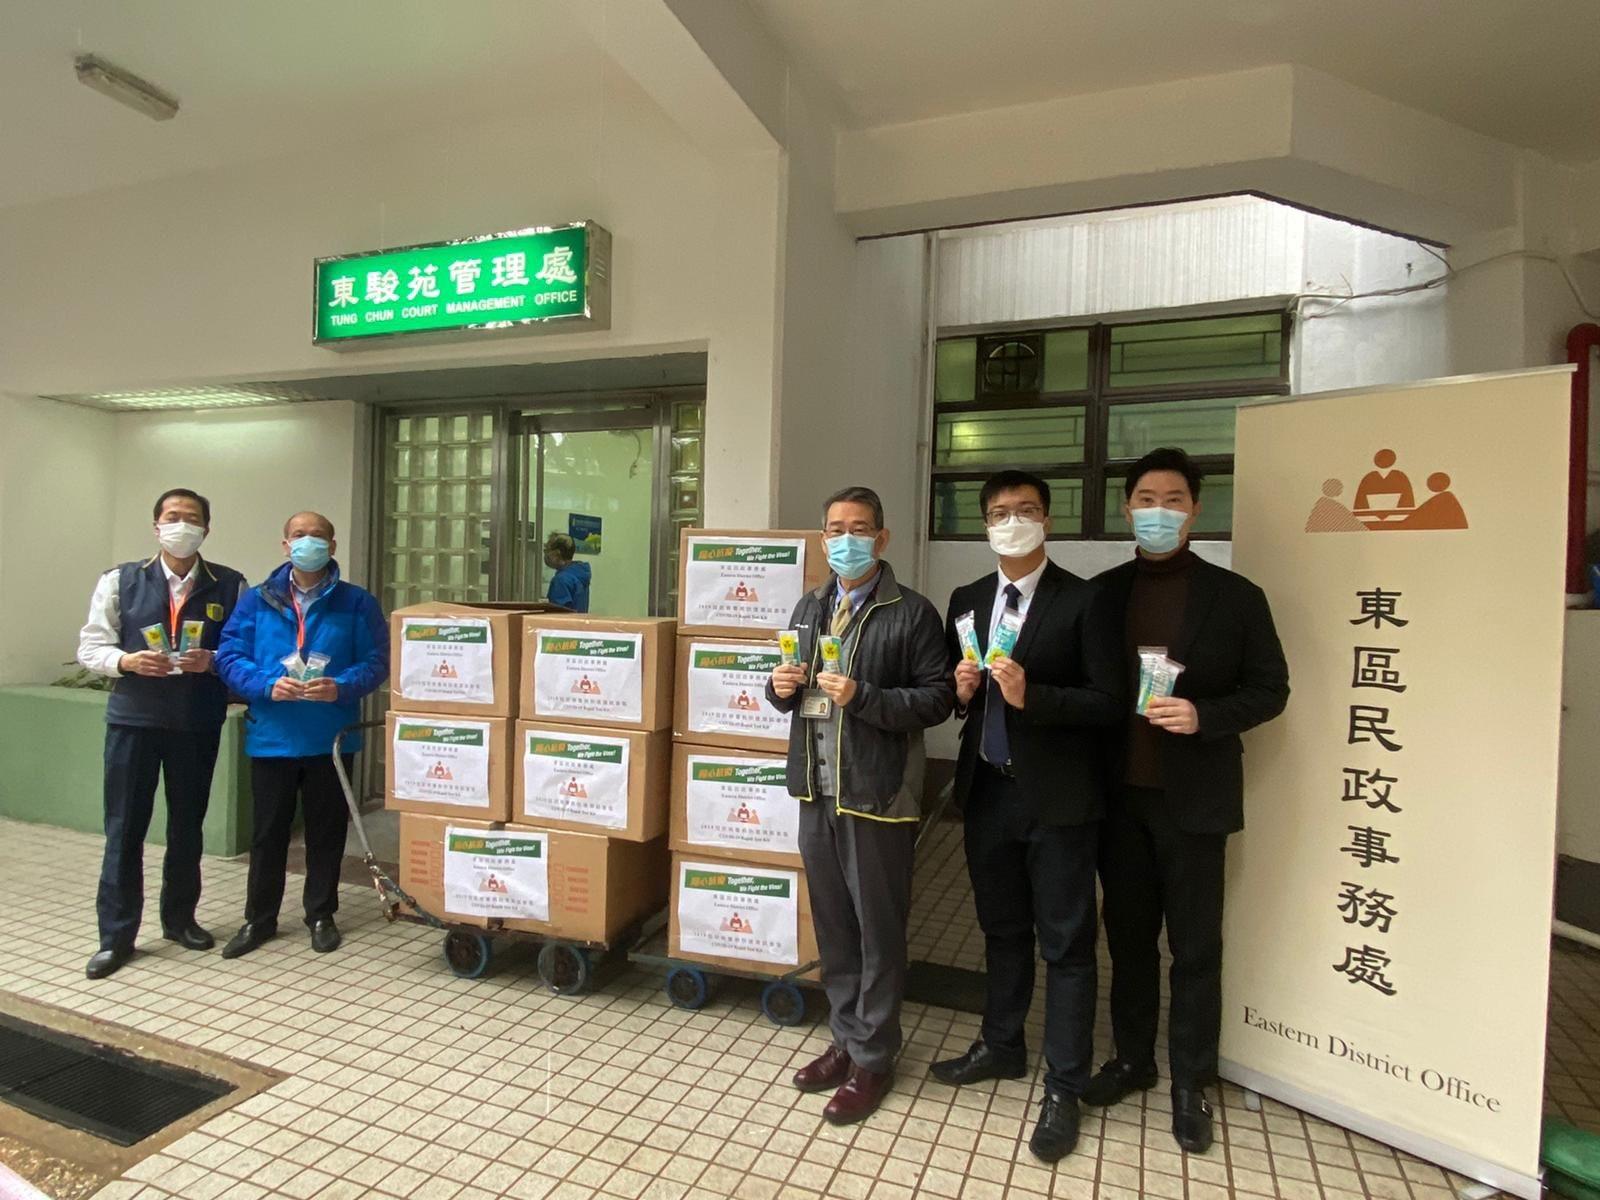 The Eastern District Office today (February 21) distributed rapid test kits to households, cleansing workers and property management staff living and working in Tung Chun Court for voluntary testing through the property management company.